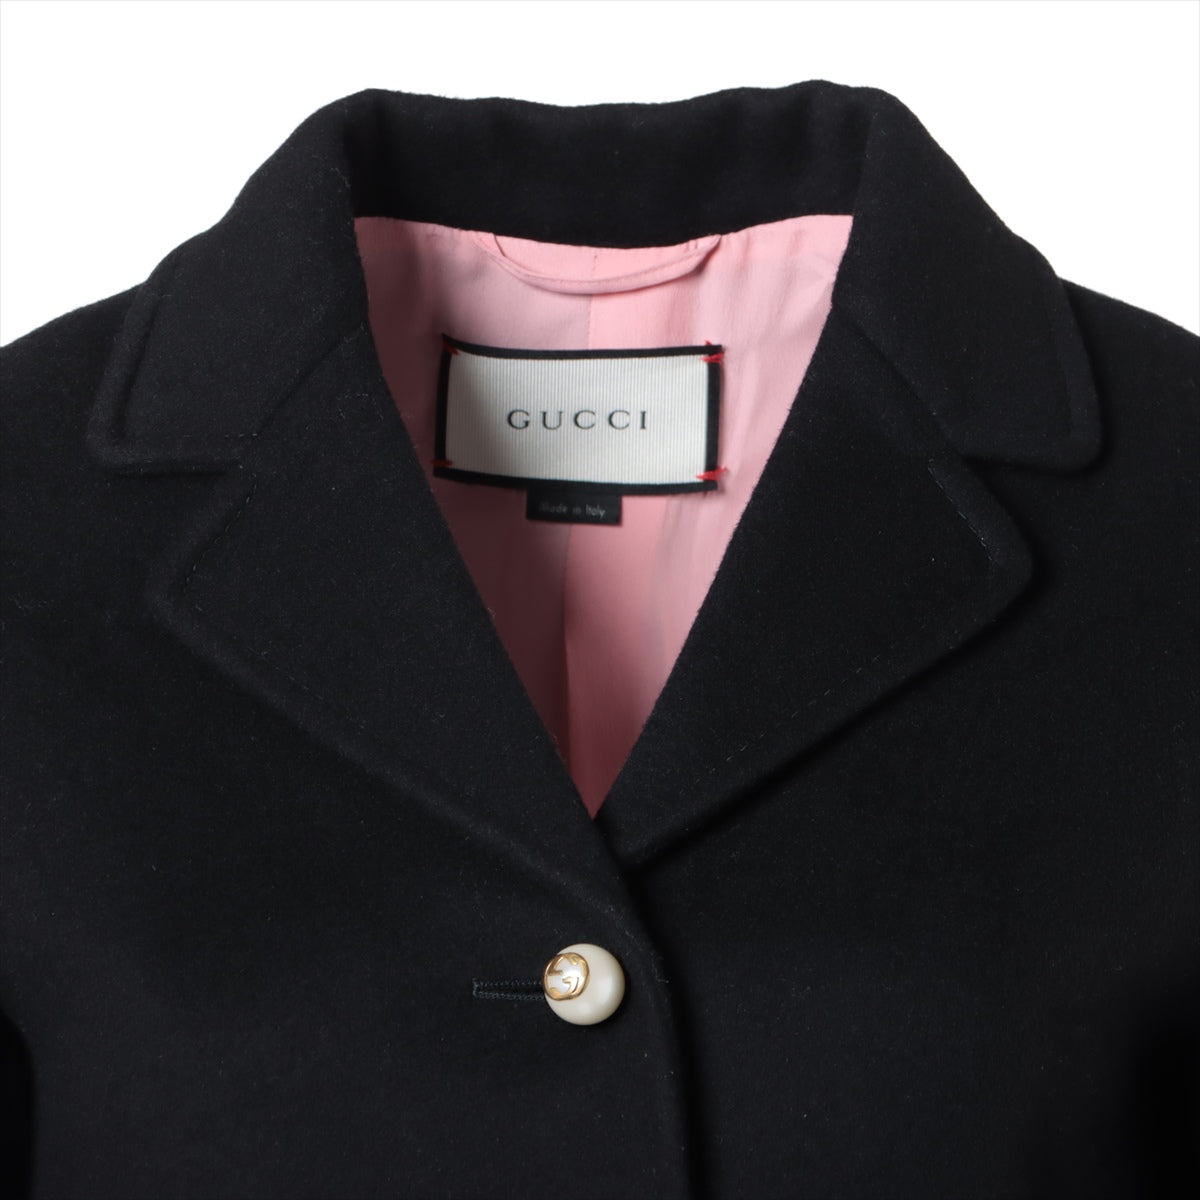 Gucci 16 years Wool coats 38 Ladies' Black  GG pearl button frill single coat 436201